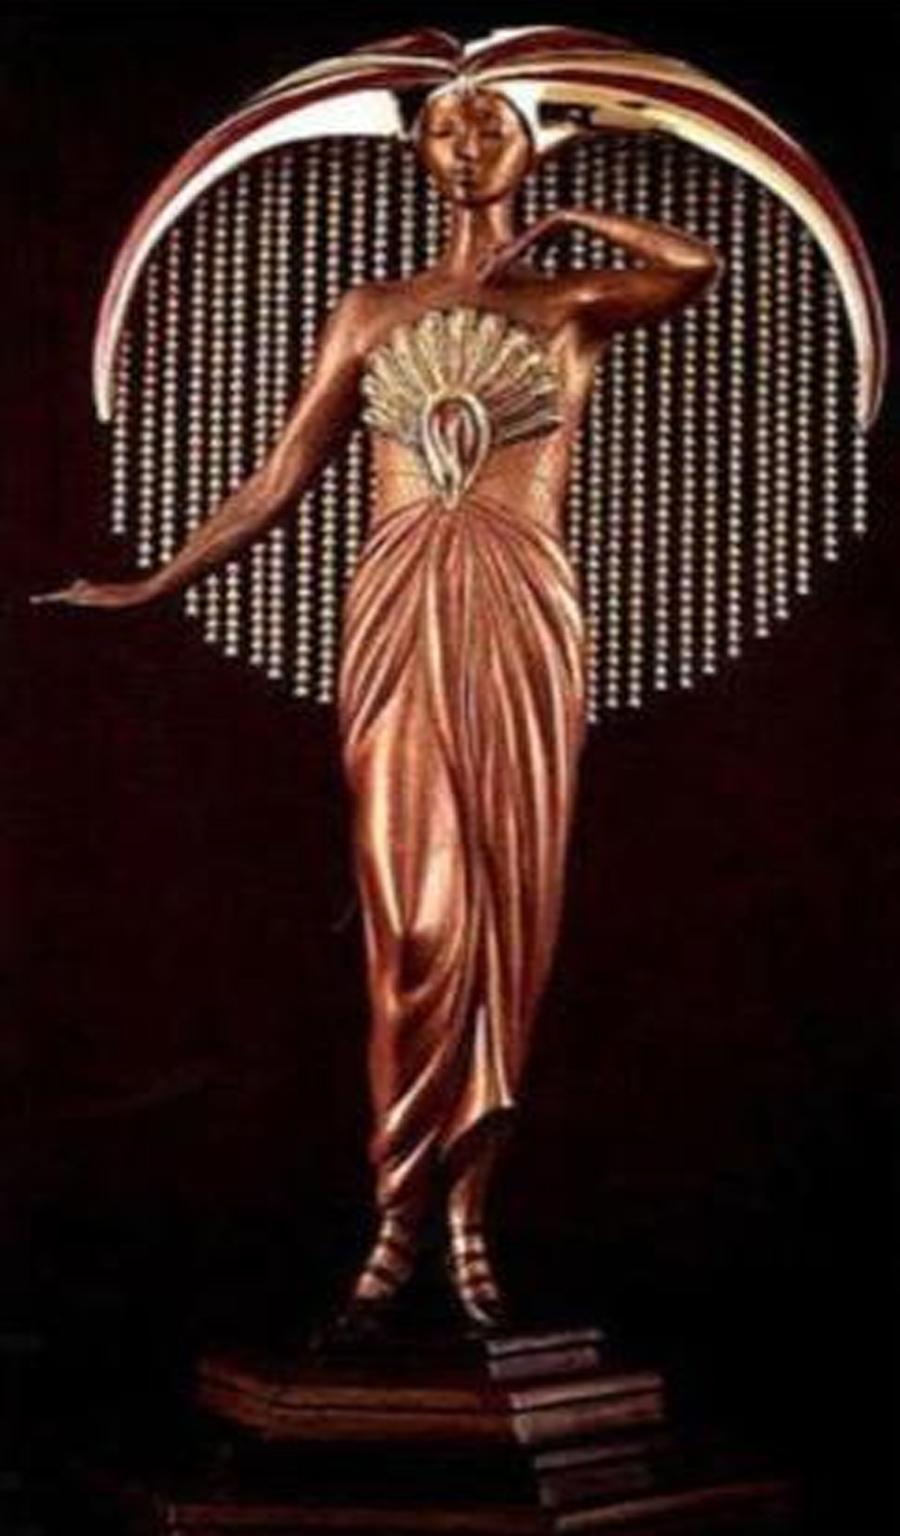 Erté Figurative Sculpture - Le Soleil  by Erte Bronze Sculpture Signed and numbered List price - $25, 000.00